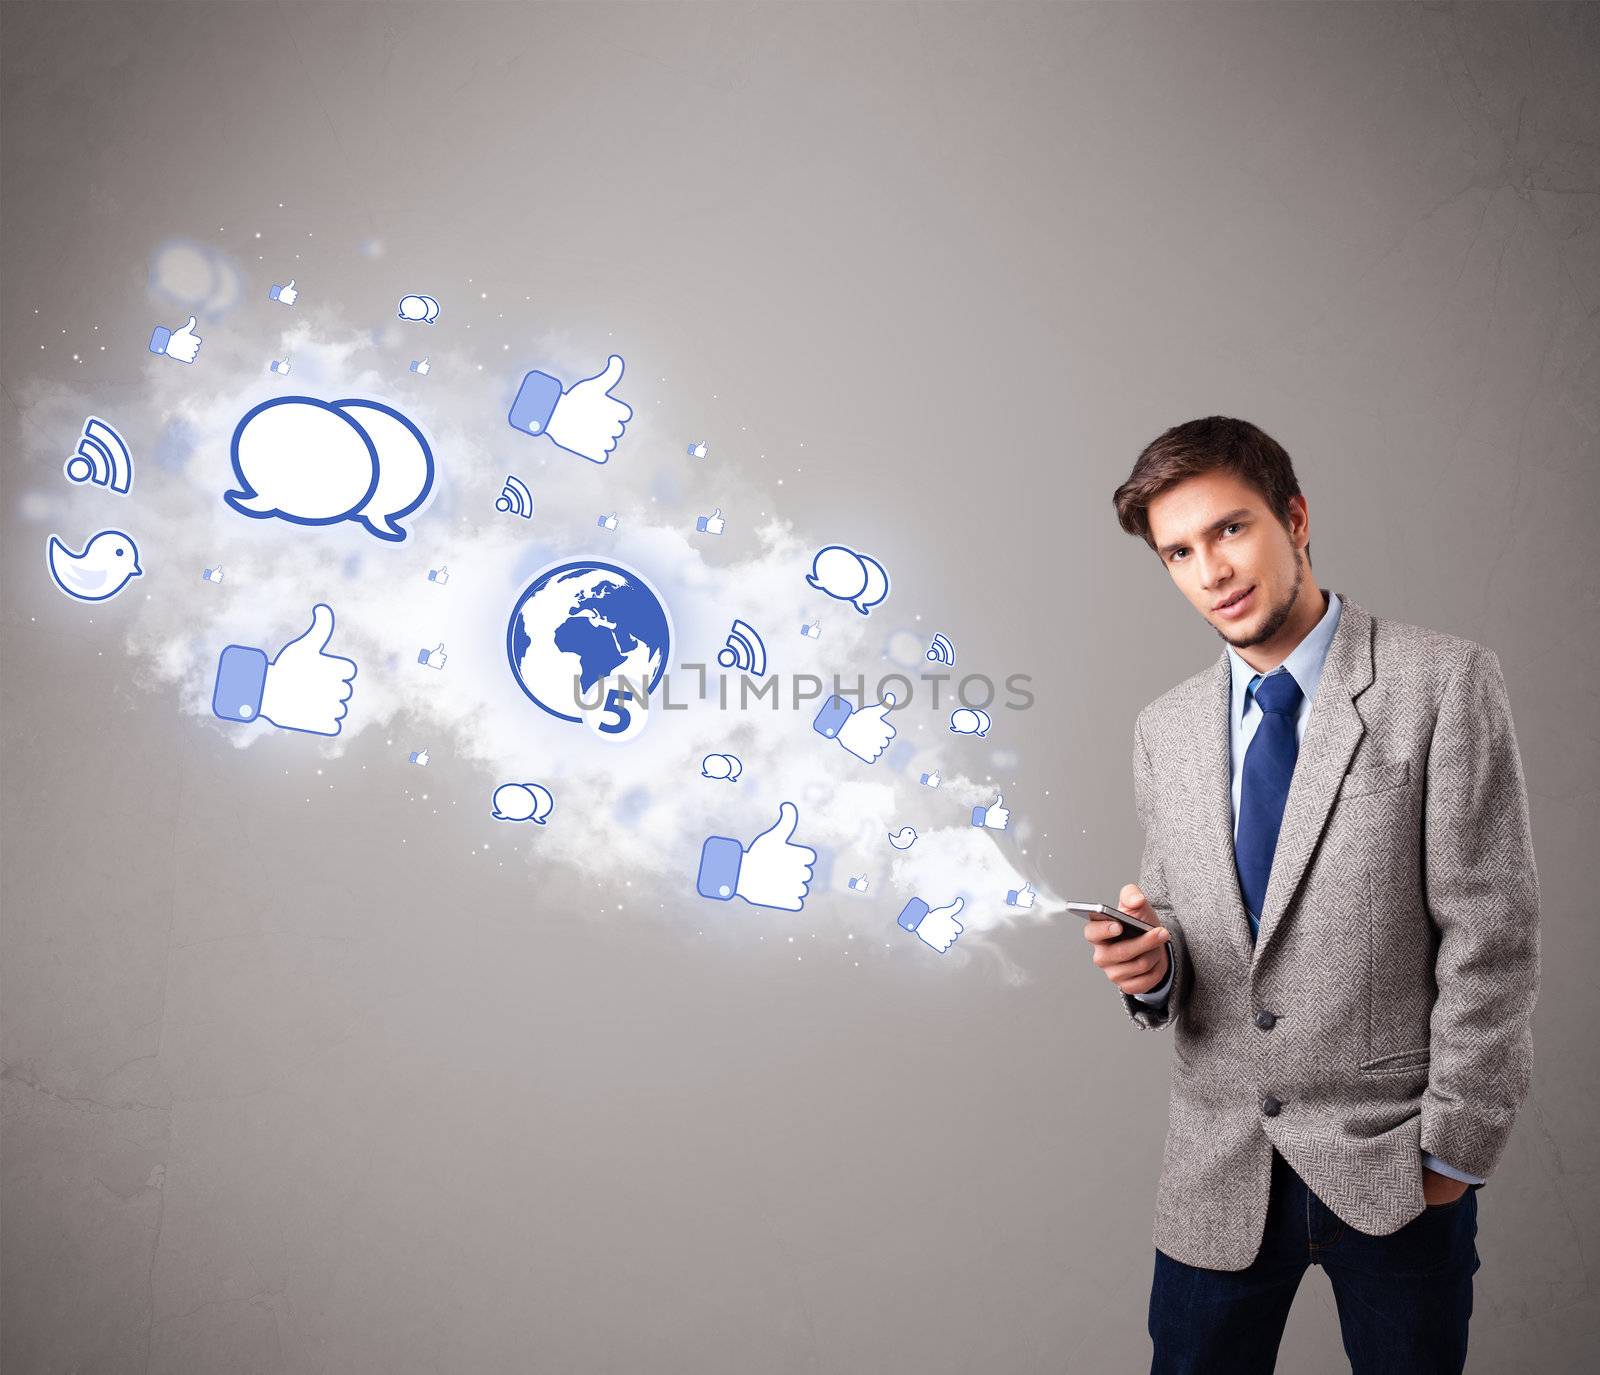 attractive young man holding a phone with social media icons by ra2studio